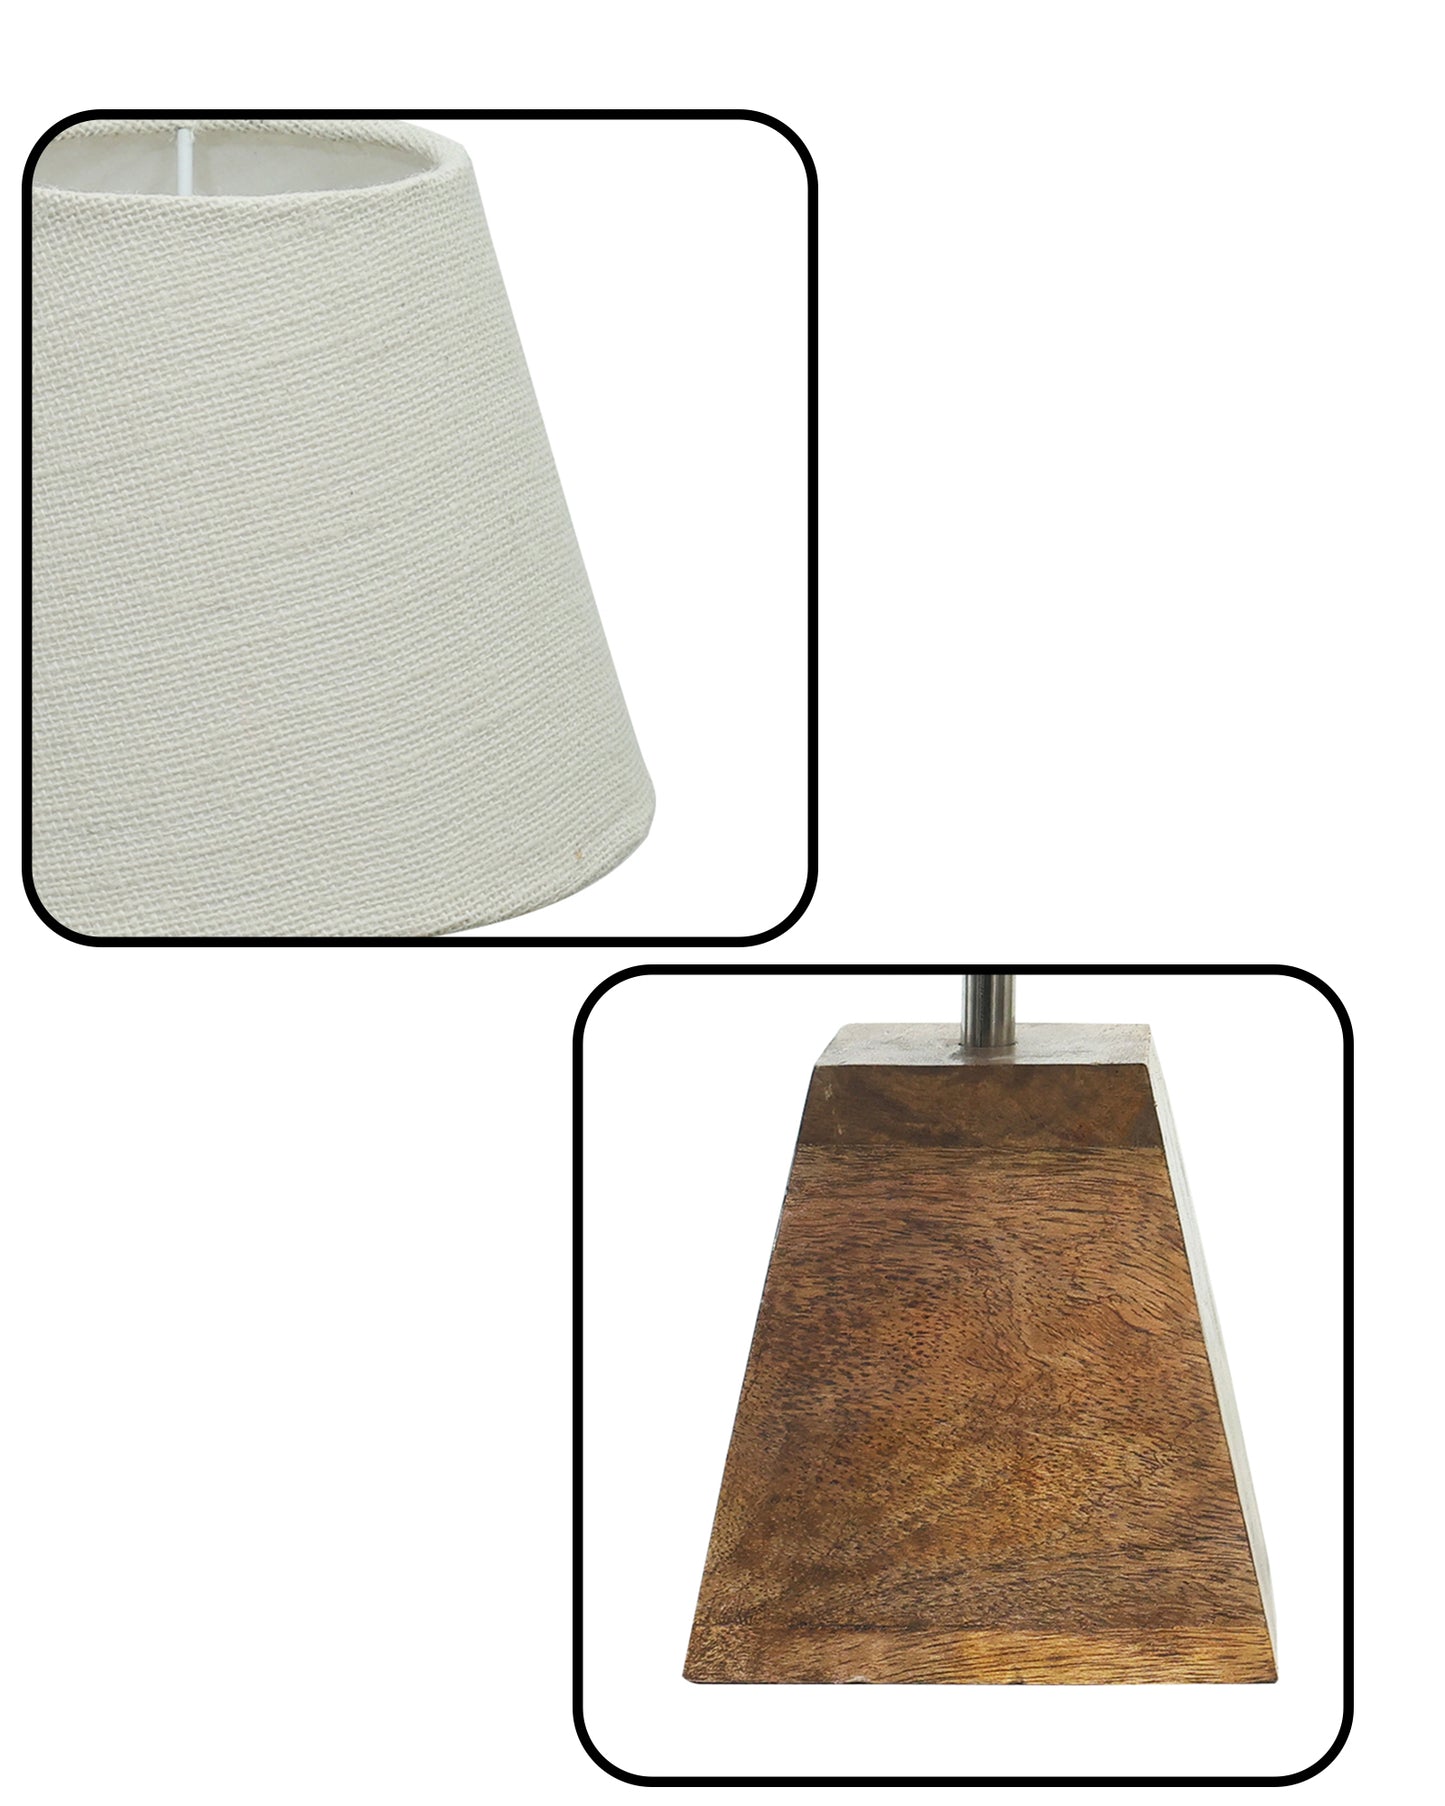 Wood Table Lamp, Modern Base Fabric Lampshade for Home Office Cafe Restaurant, Pyramid, White Jute